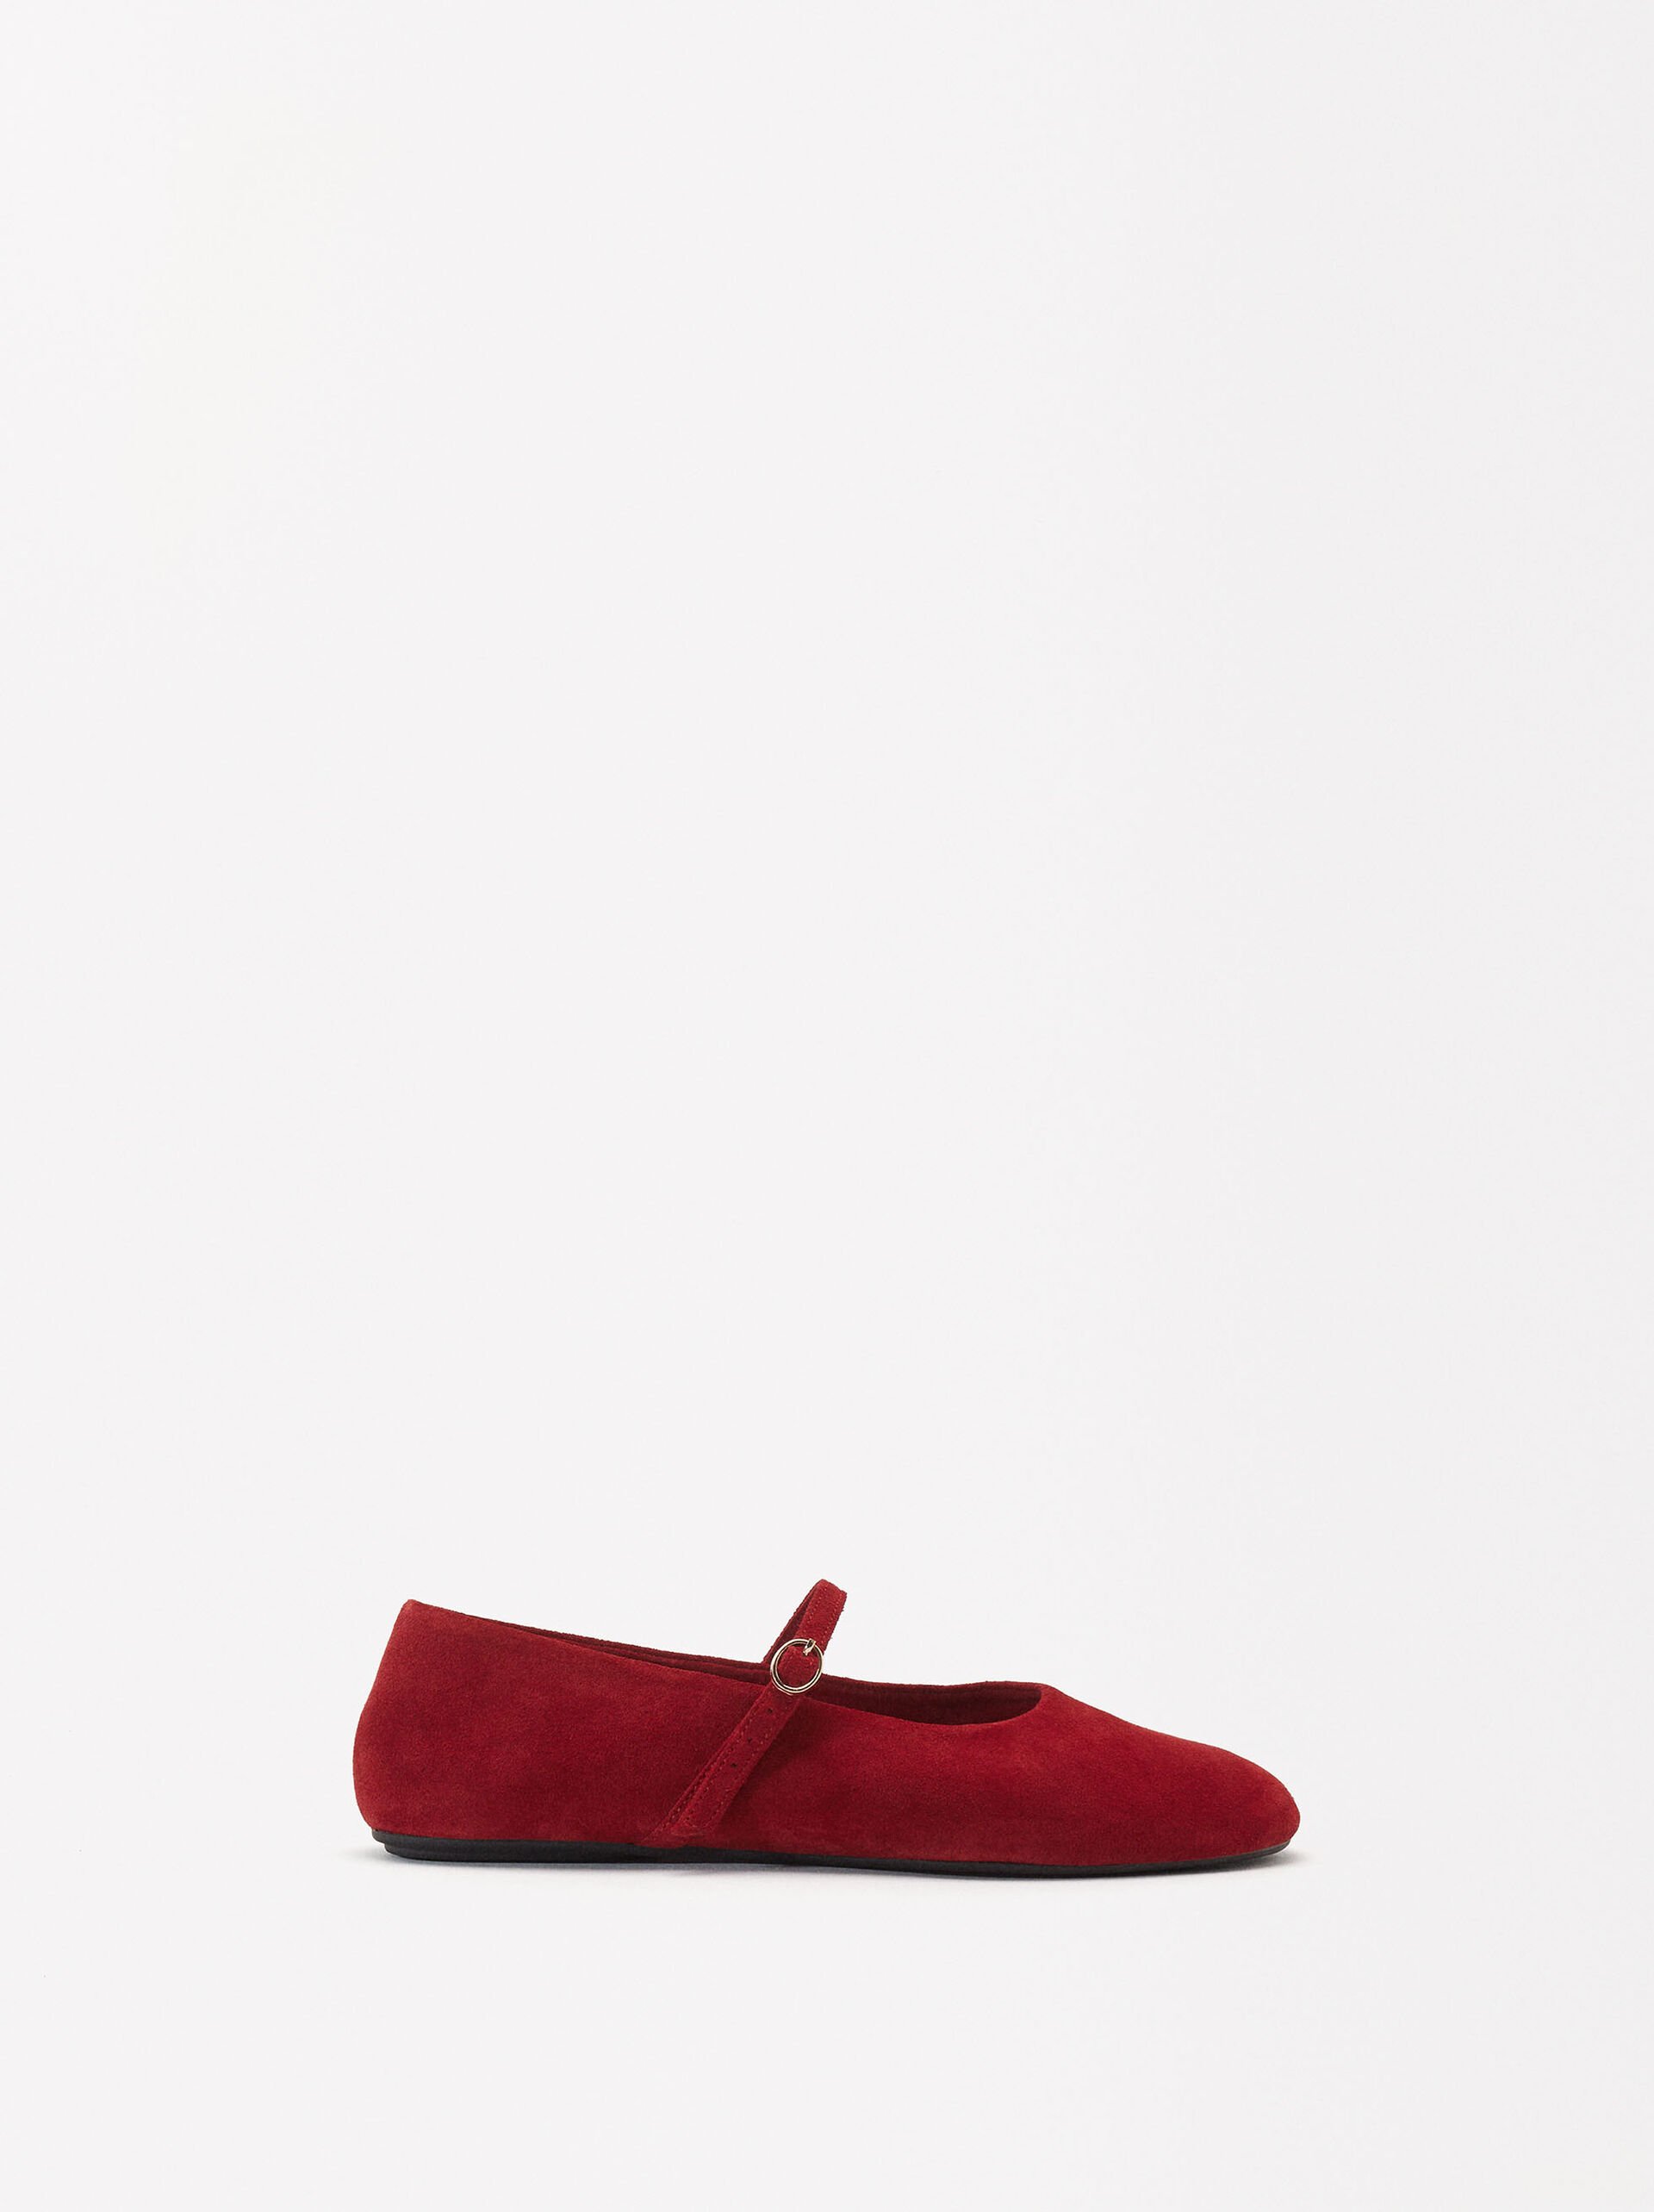 Suede Leather Ballerinas image number 2.0